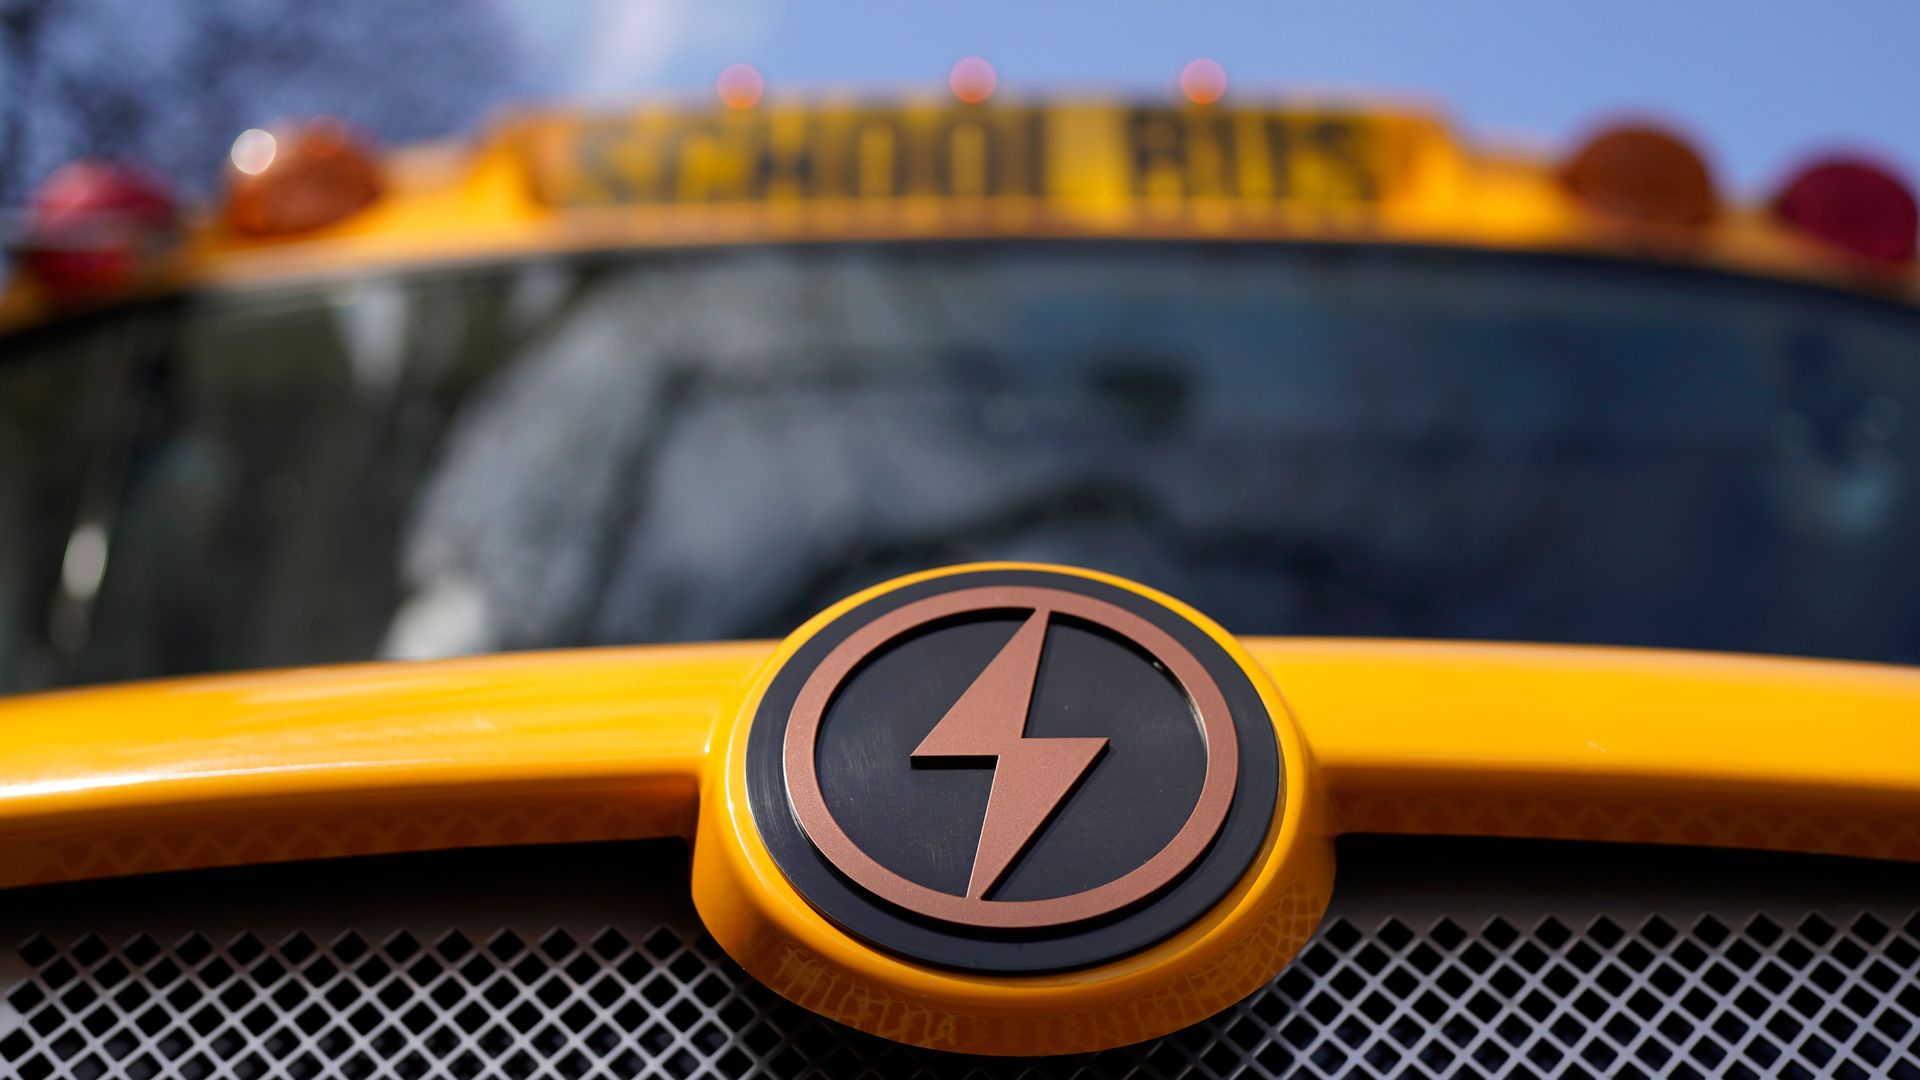 More electric school buses are set to hit American roadways than ever before, jumping by over 200% since the start of 2022.